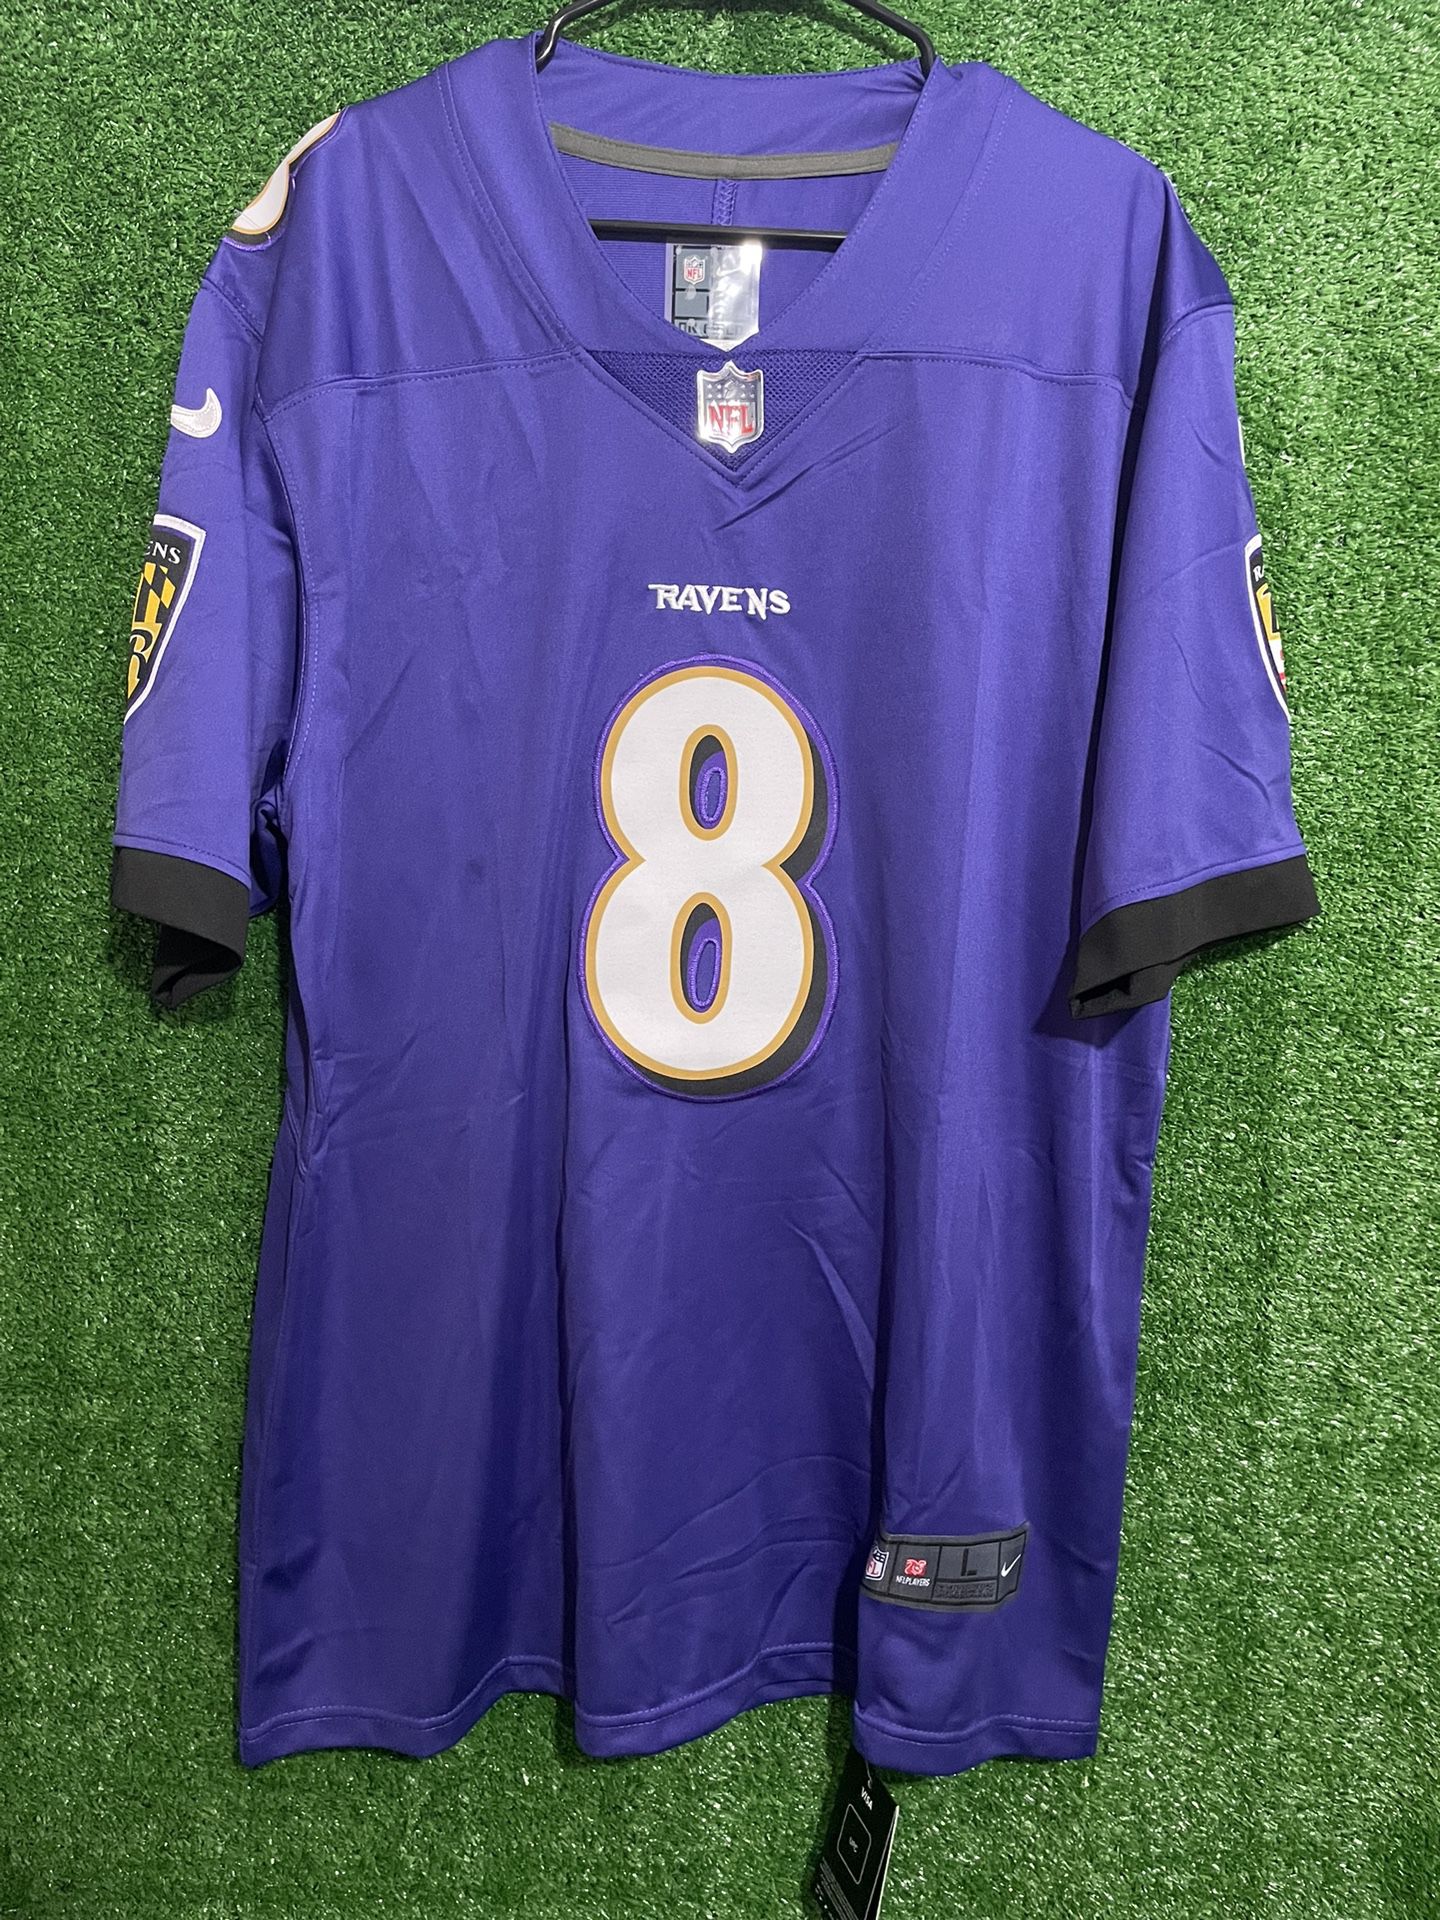 LAMAR JACKSON BALTIMORE RAVENS NIKE JERSEY BRAND NEW WITH TAGS SIZES LARGE AND XL AVAILABLE